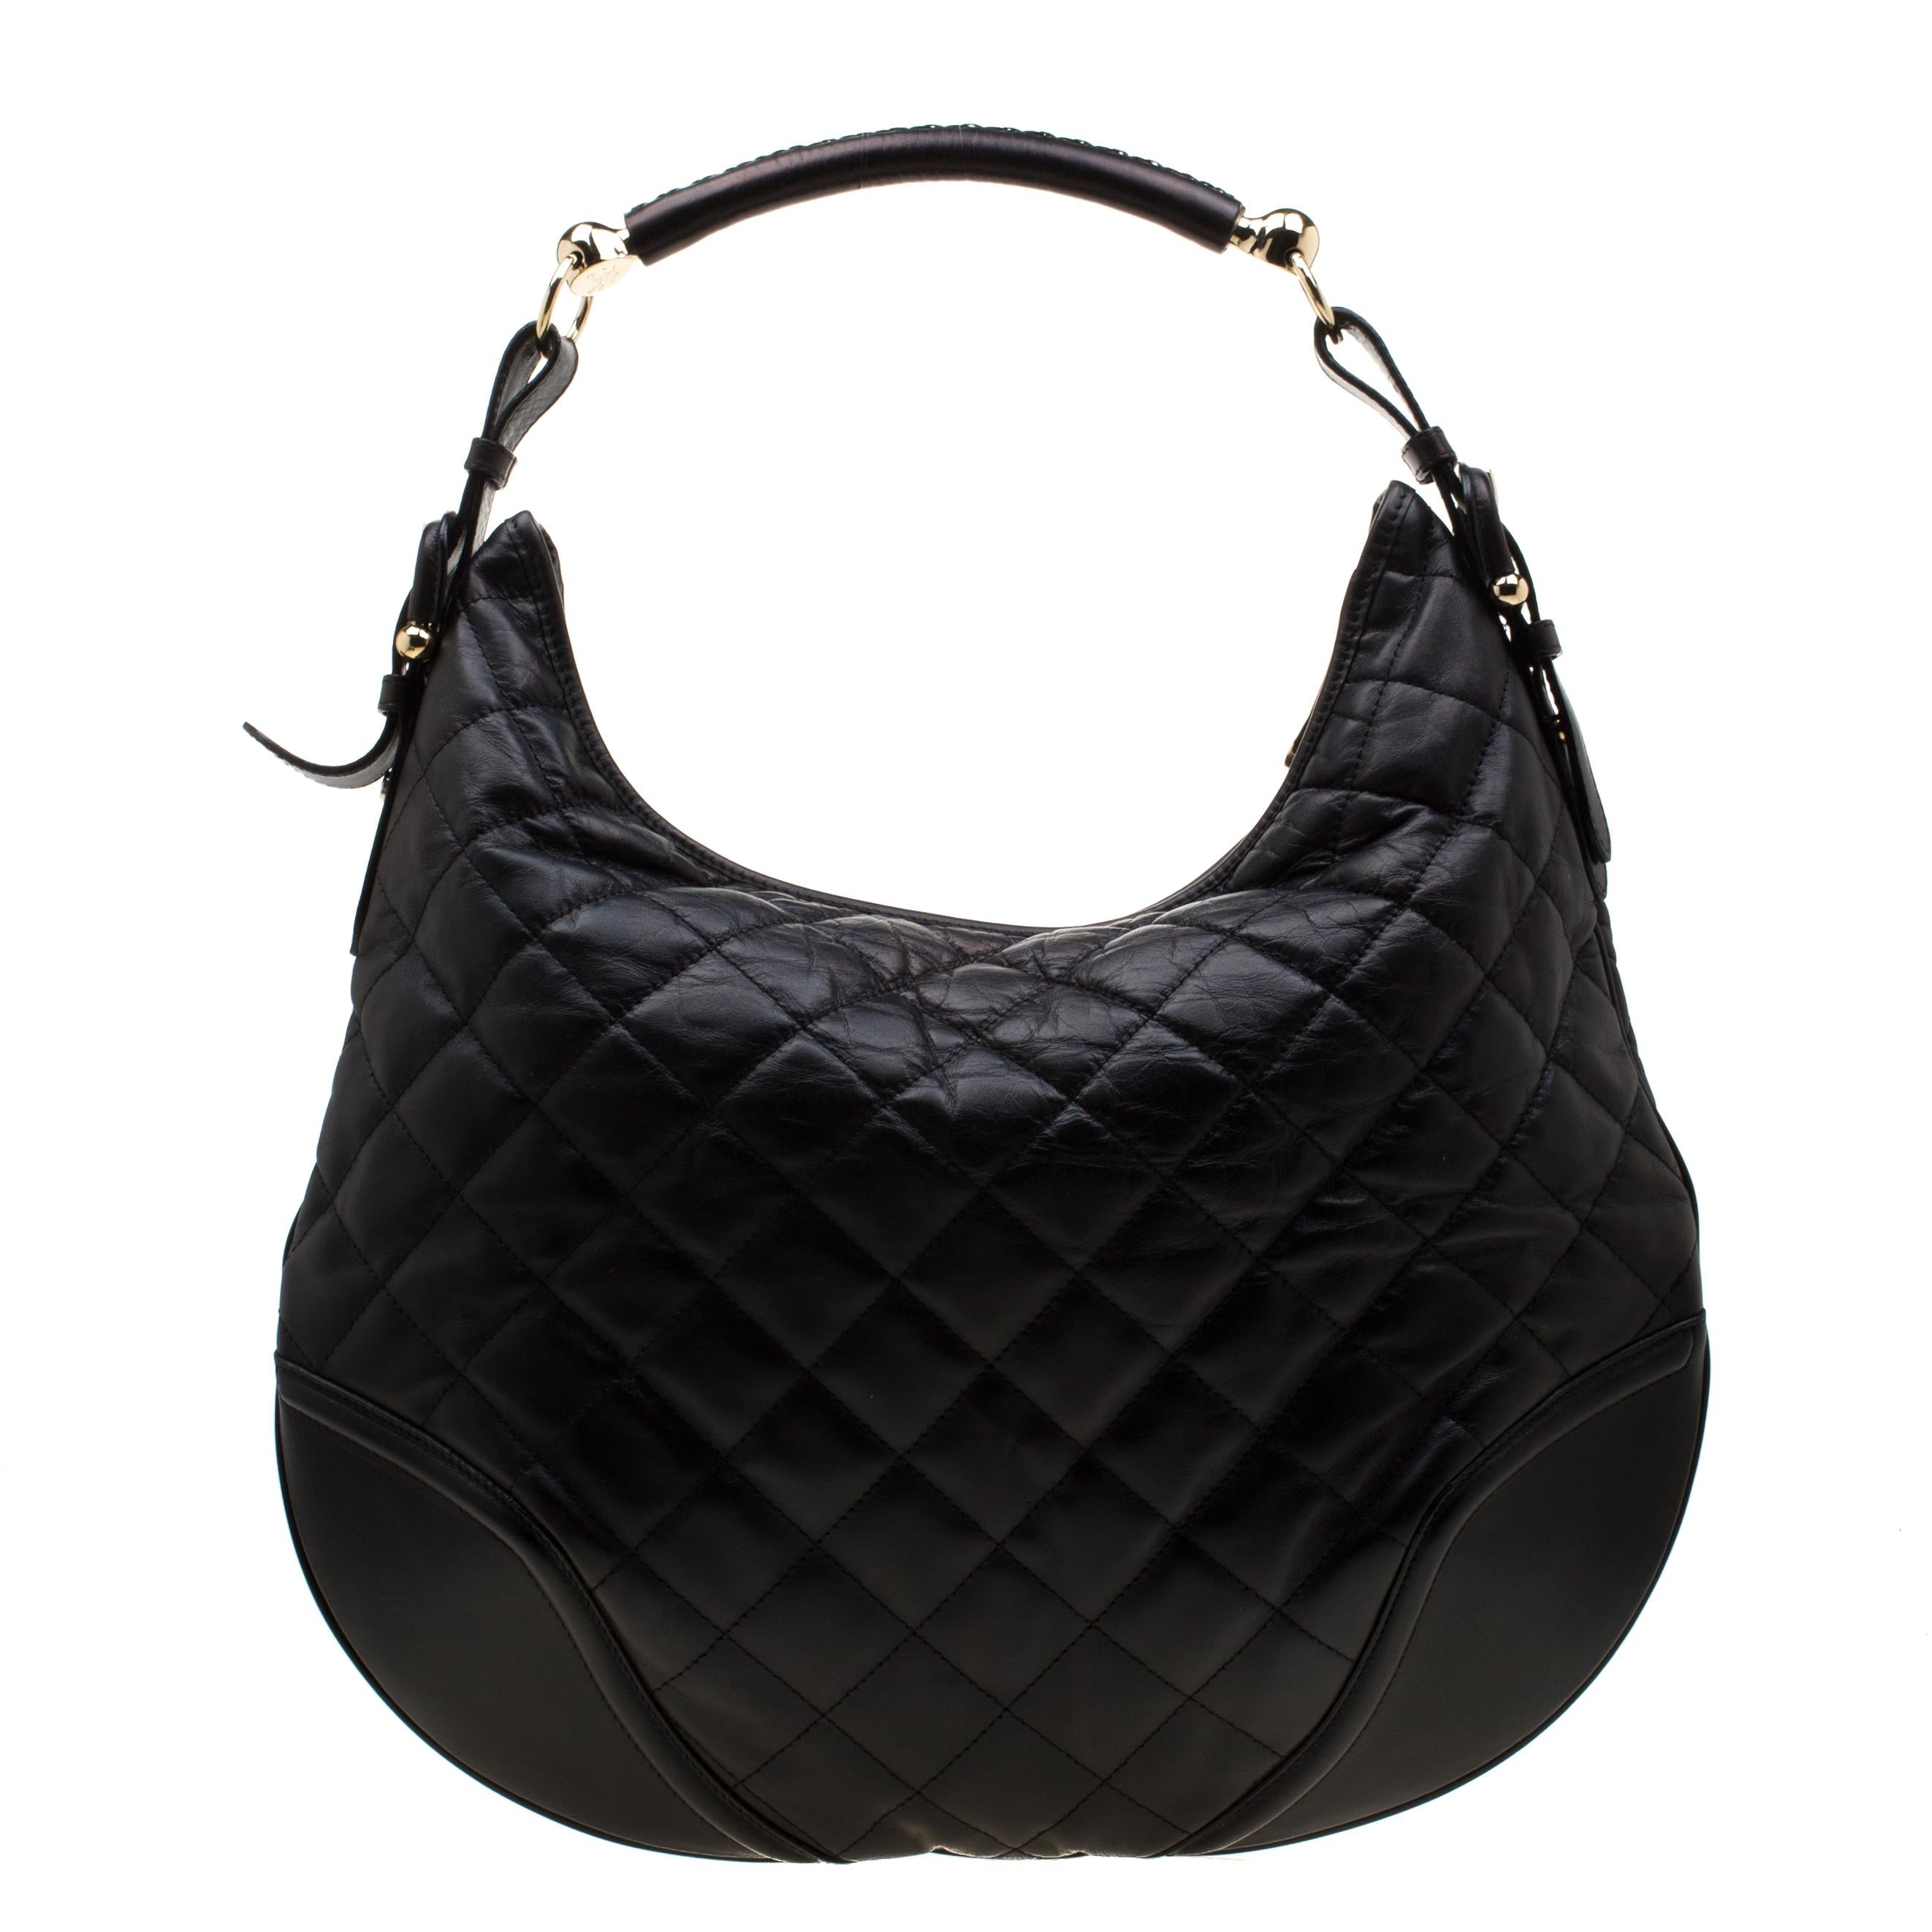 This Burberry Hoxton hobo will make a splendid addition to your closet. Crafted from quilted leather, it features a single handle and gold-tone hardware. The zip closure opens into a fabric-lined spacious enough to store your daily